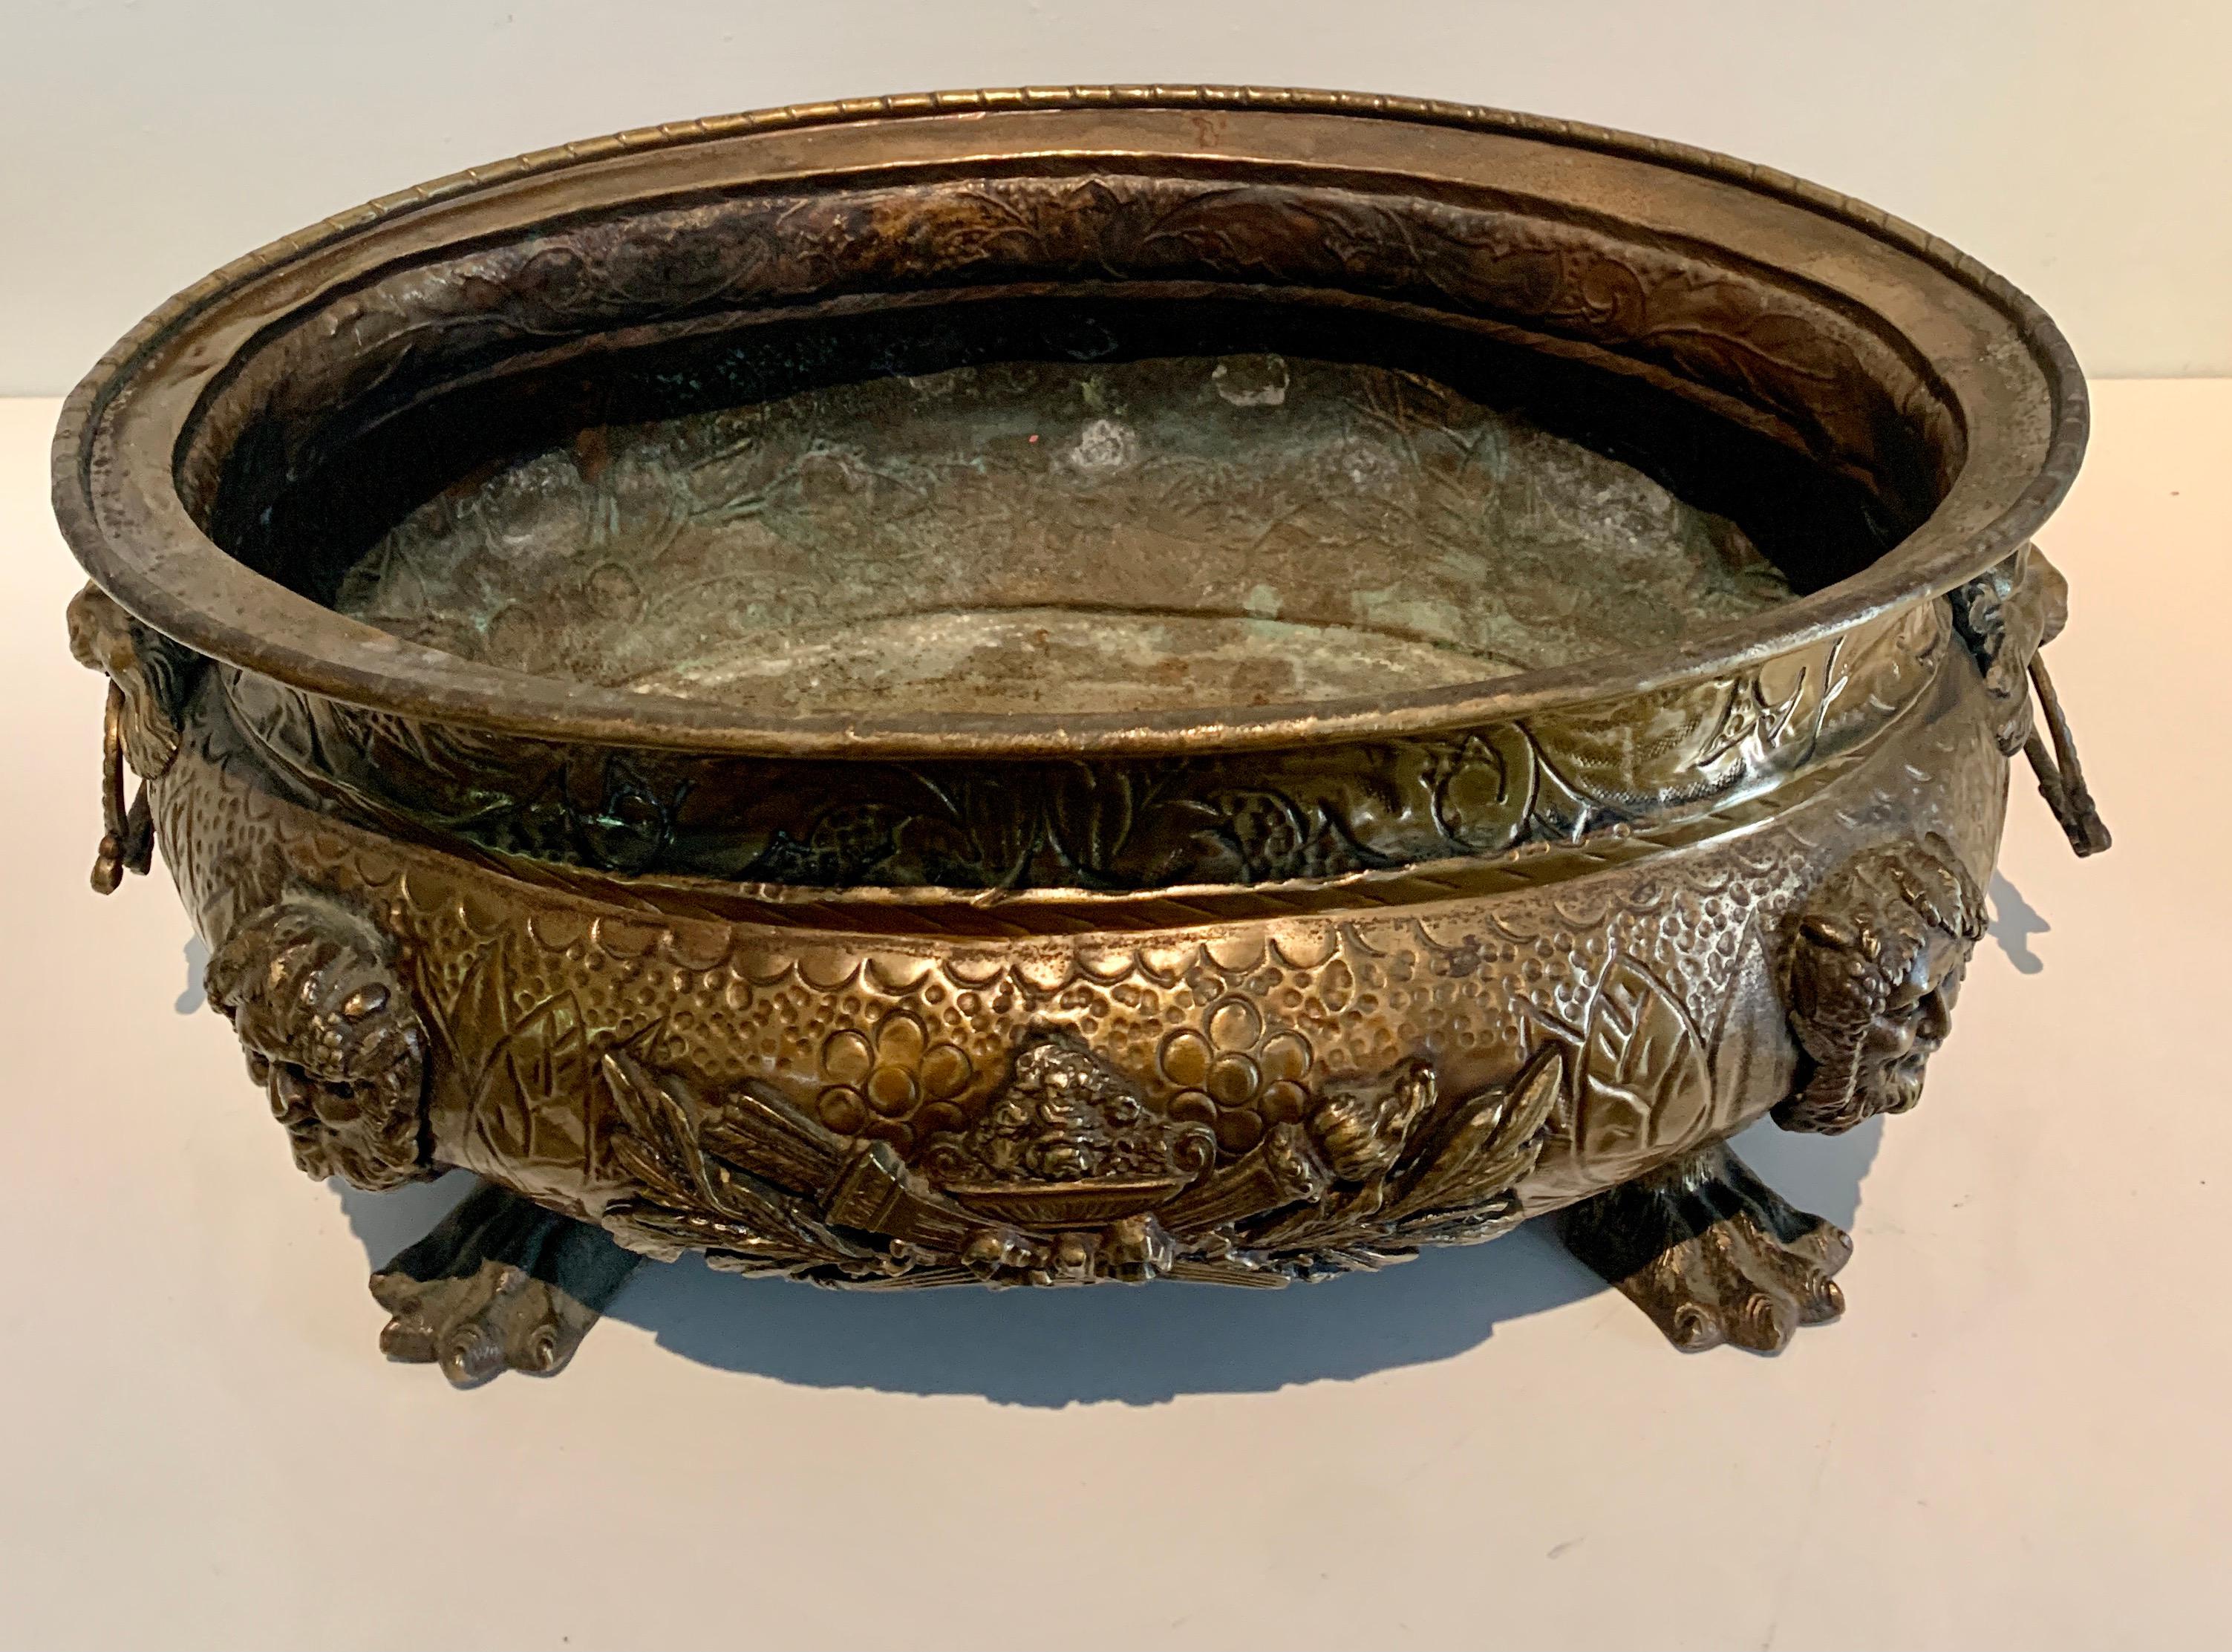 English Brass Jardiniere with Lions Heads, Rings and Paw Feet Details For Sale 1